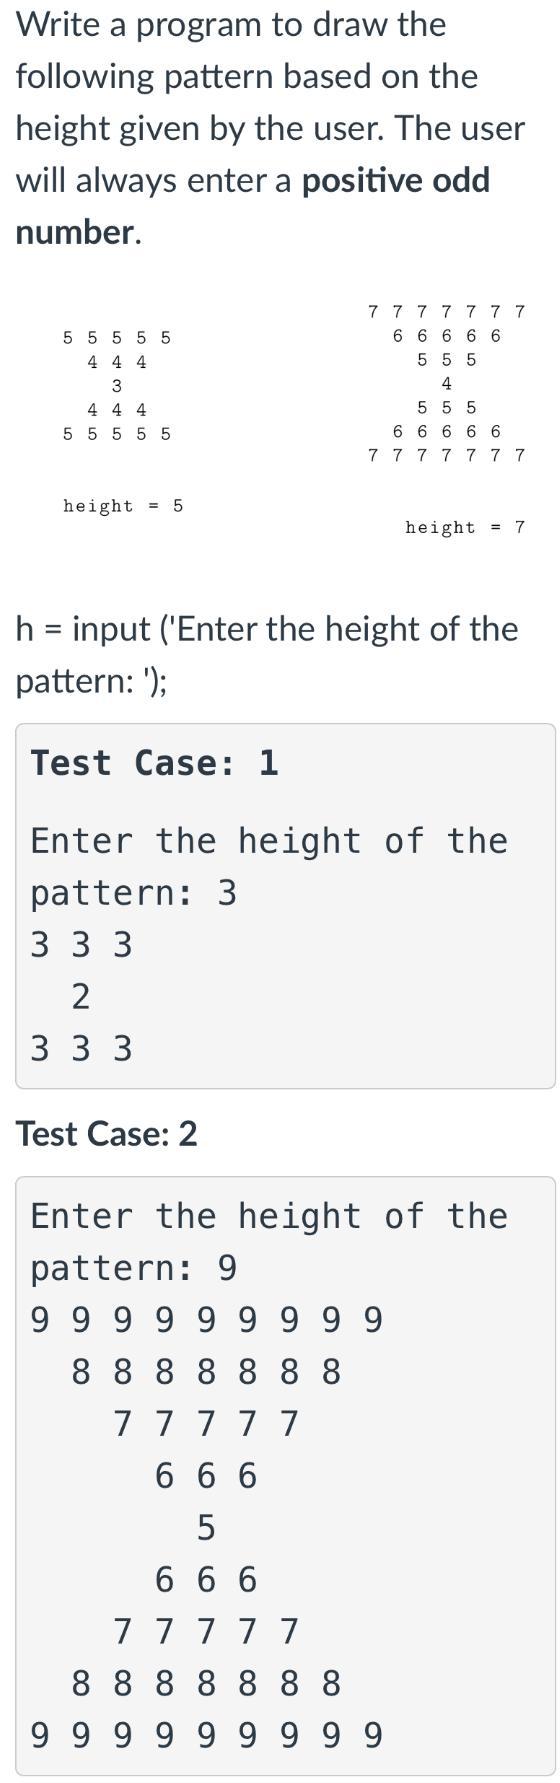 Write a program to draw the following pattern based on the height given by the user. The user will always